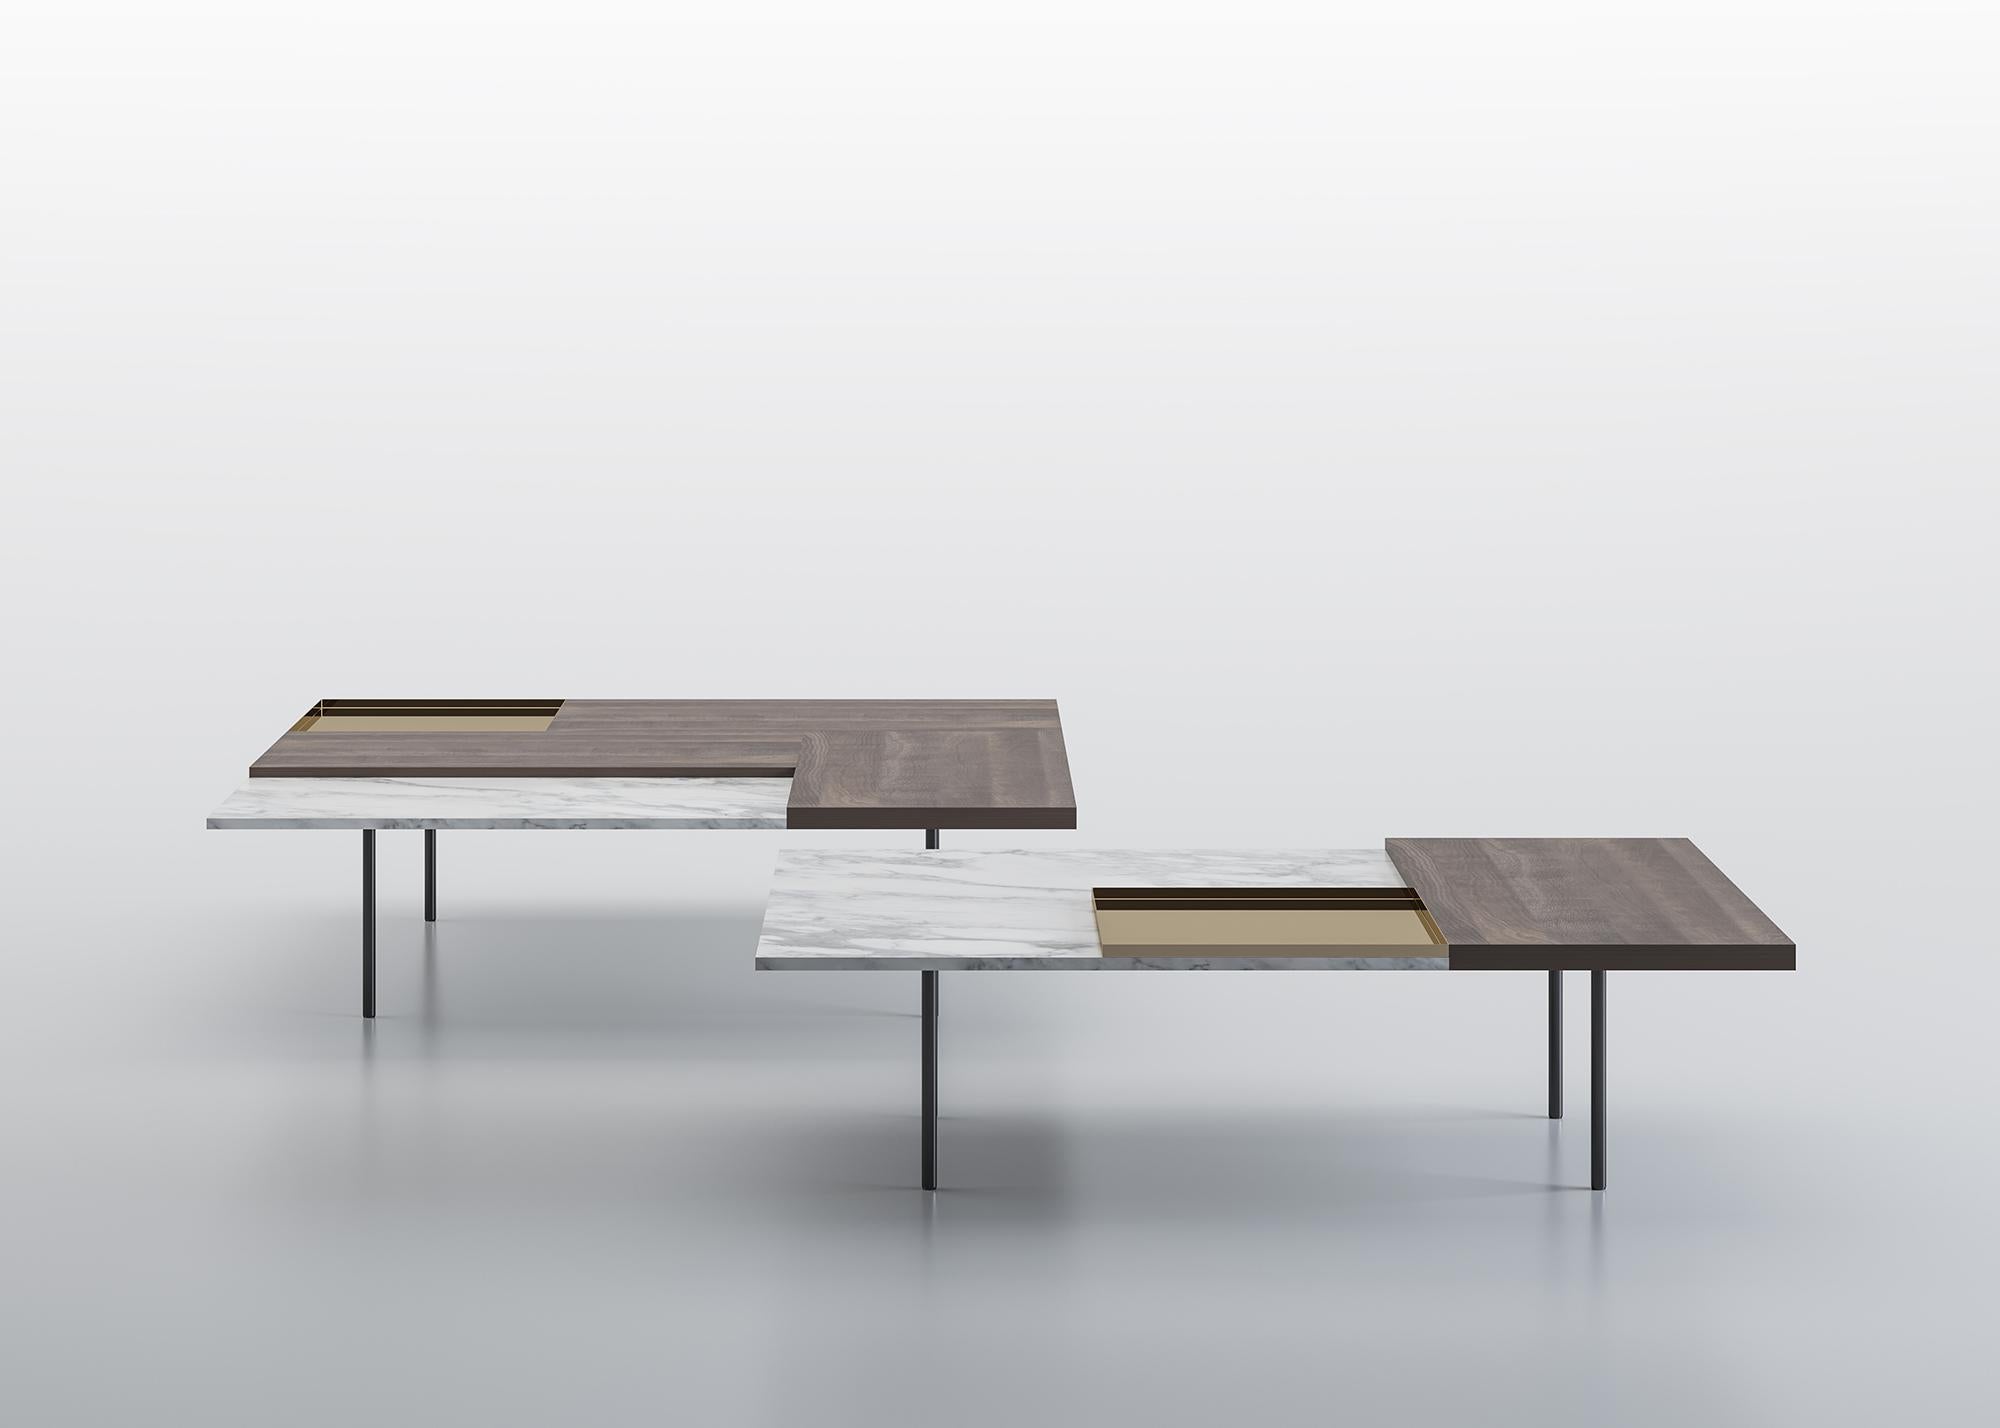 A system of small tables with a top made by freely combining different contrasting materials: wood, marble, shiny metals, giving life to a mosaic of materials differing by type, color nuances, texture and thickness. Rectangular or square, the tables